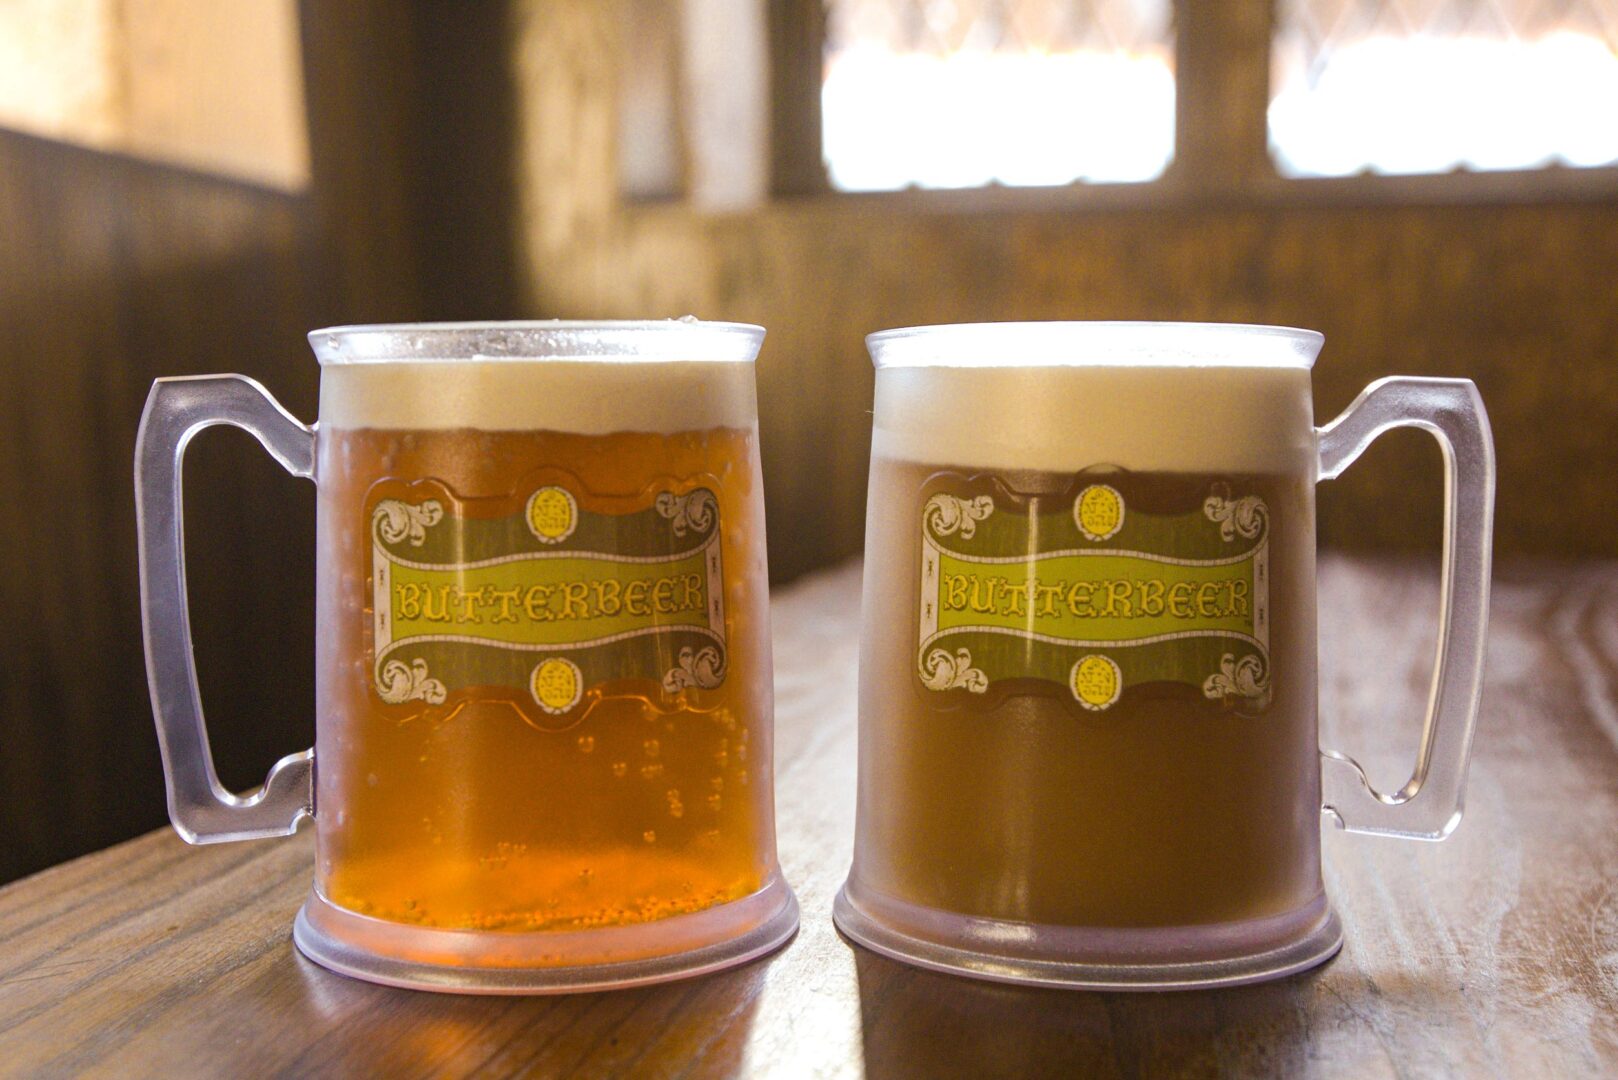 New Non-Dairy Butterbeer Comes to the Wizarding World of Harry Potter at Universal